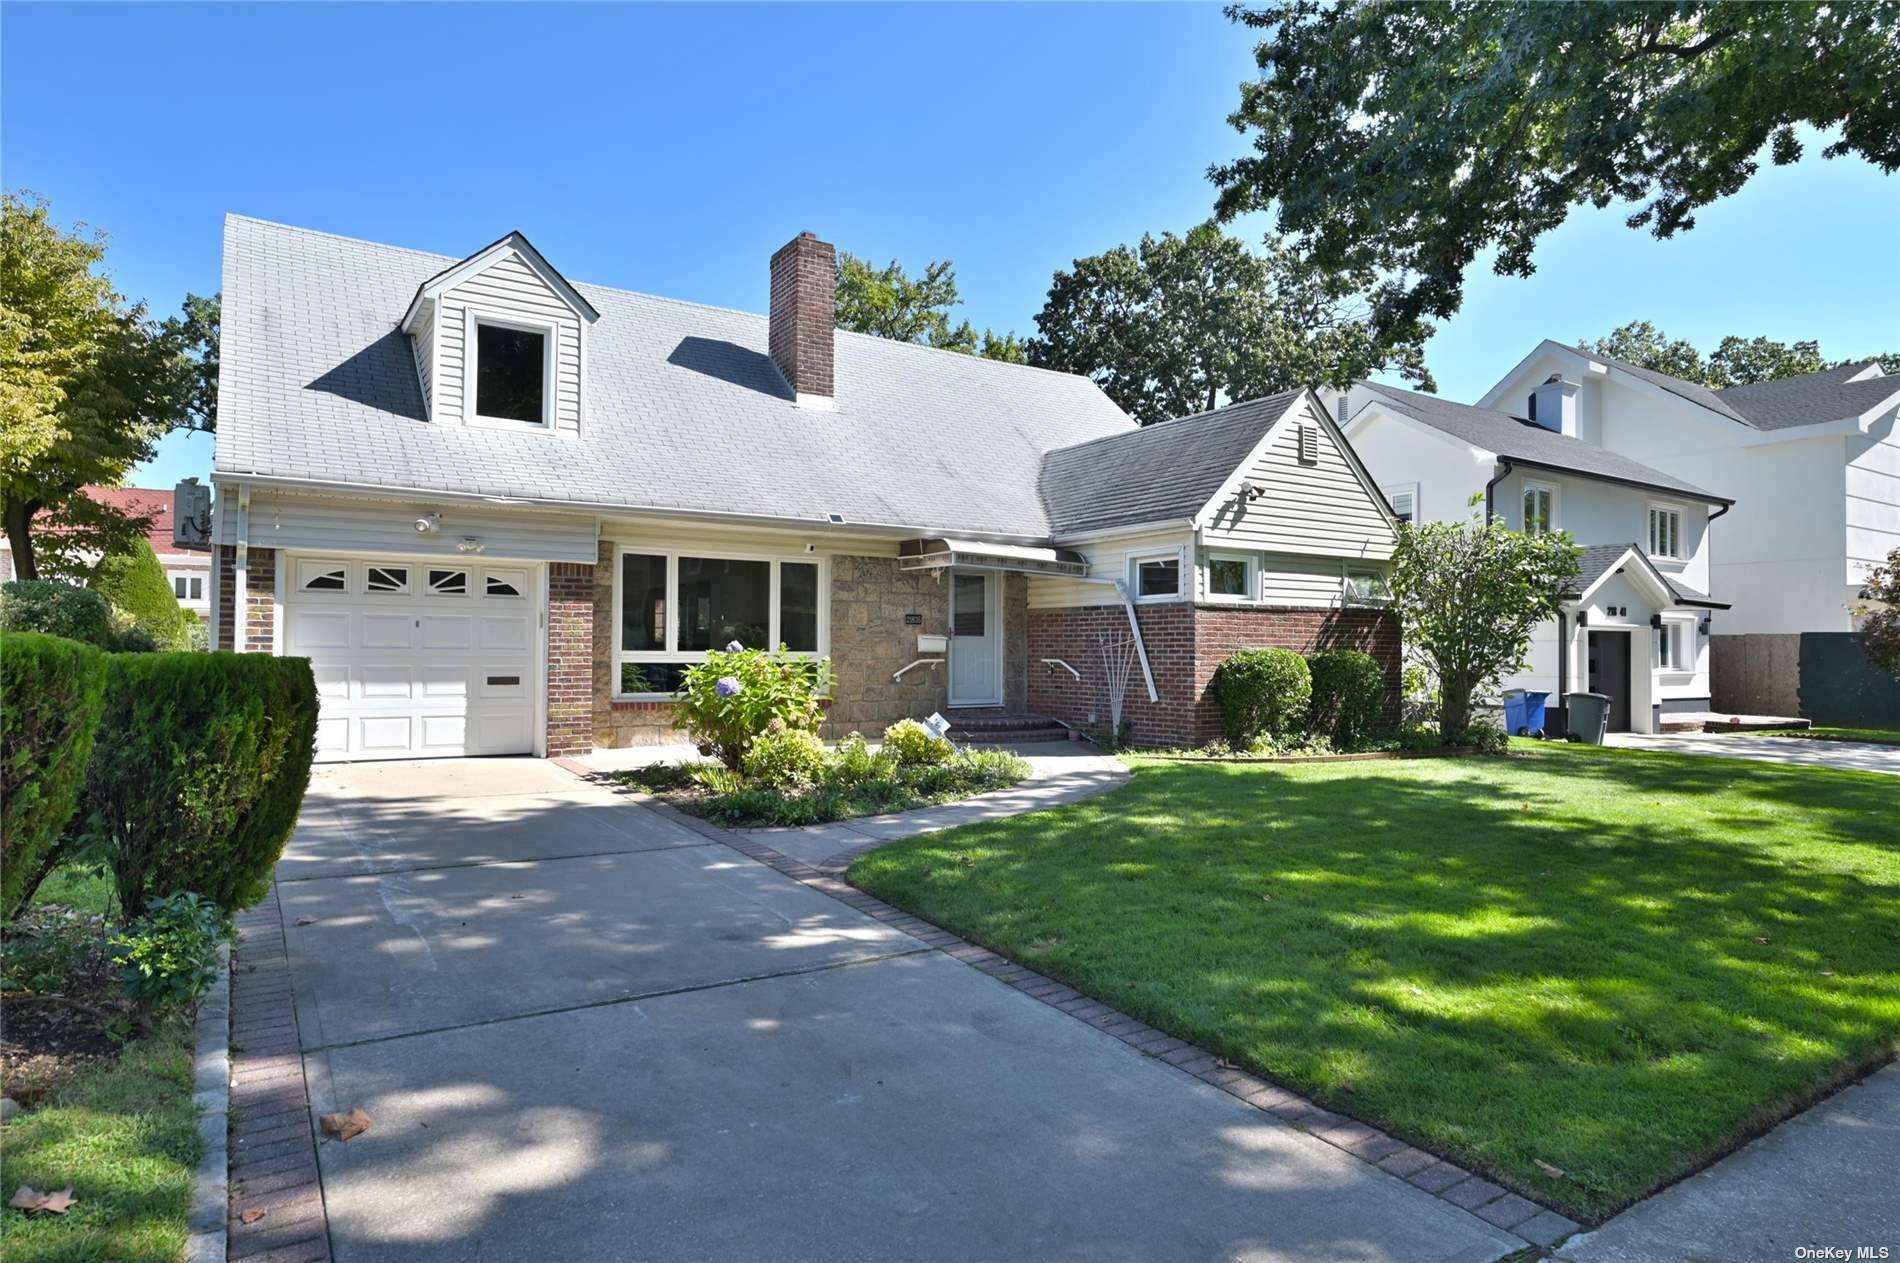 Welcome to this beautifully renovated single family home in the charming neighborhood of Hollis Hills.